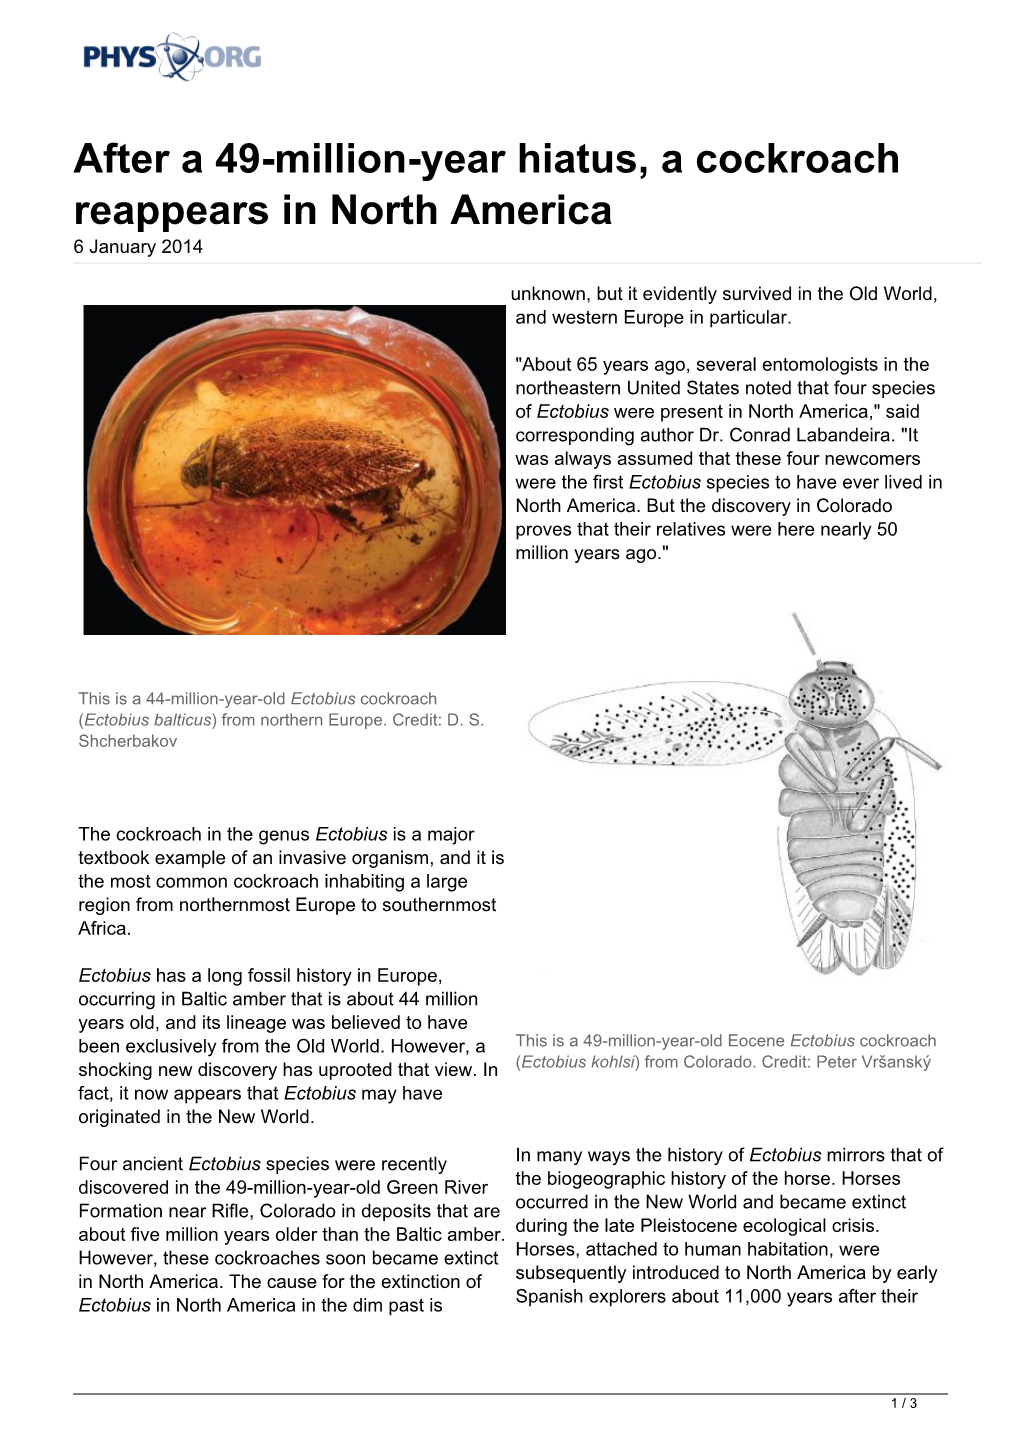 After a 49-Million-Year Hiatus, a Cockroach Reappears in North America 6 January 2014